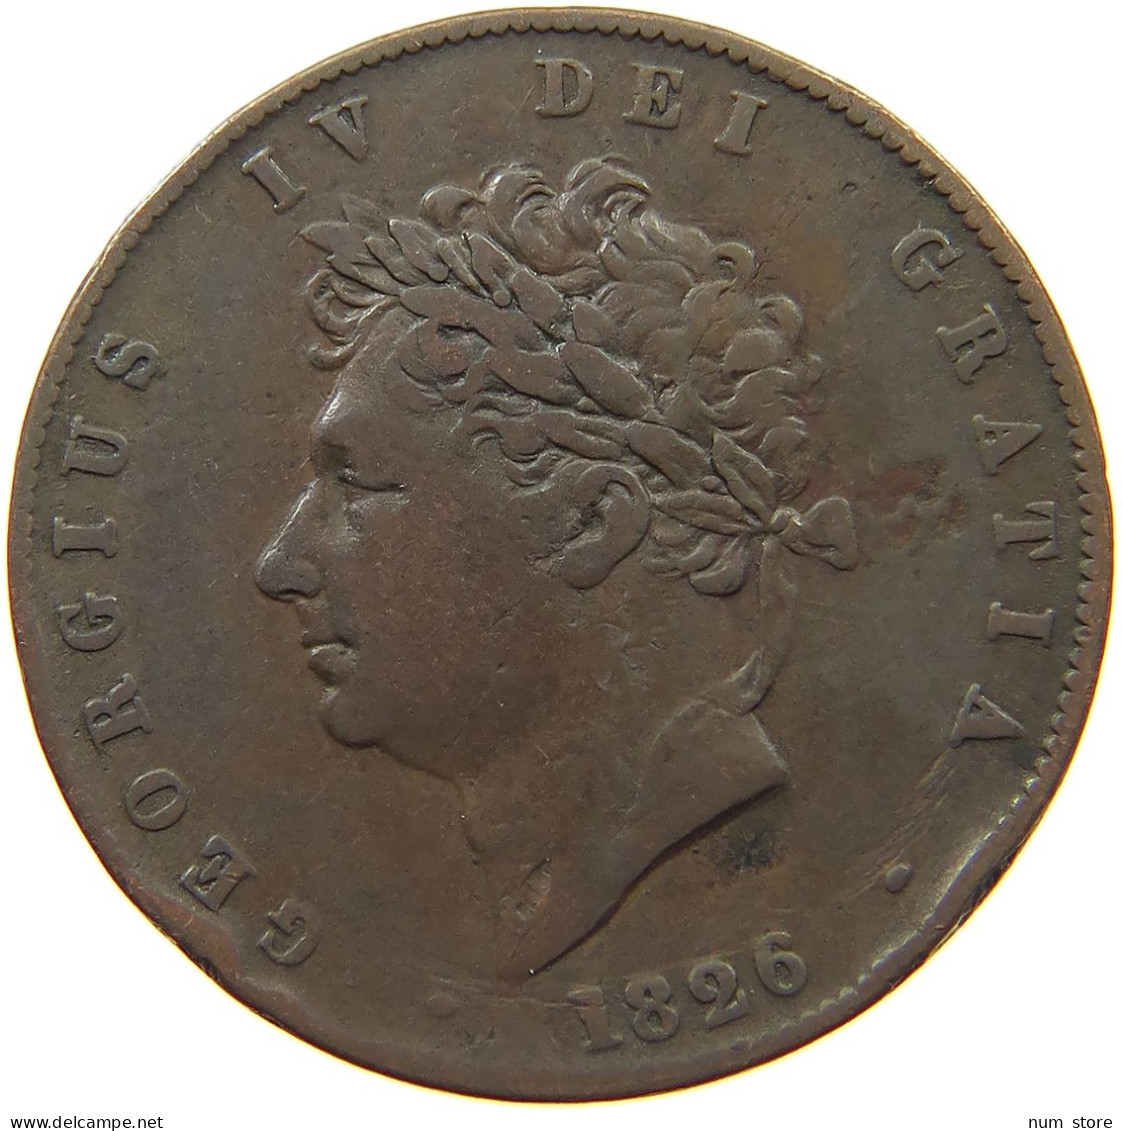 GREAT BRITAIN HALFPENNY 1826 GEORGE IV. (1820-1830) #s077 0227 - C. 1/2 Penny